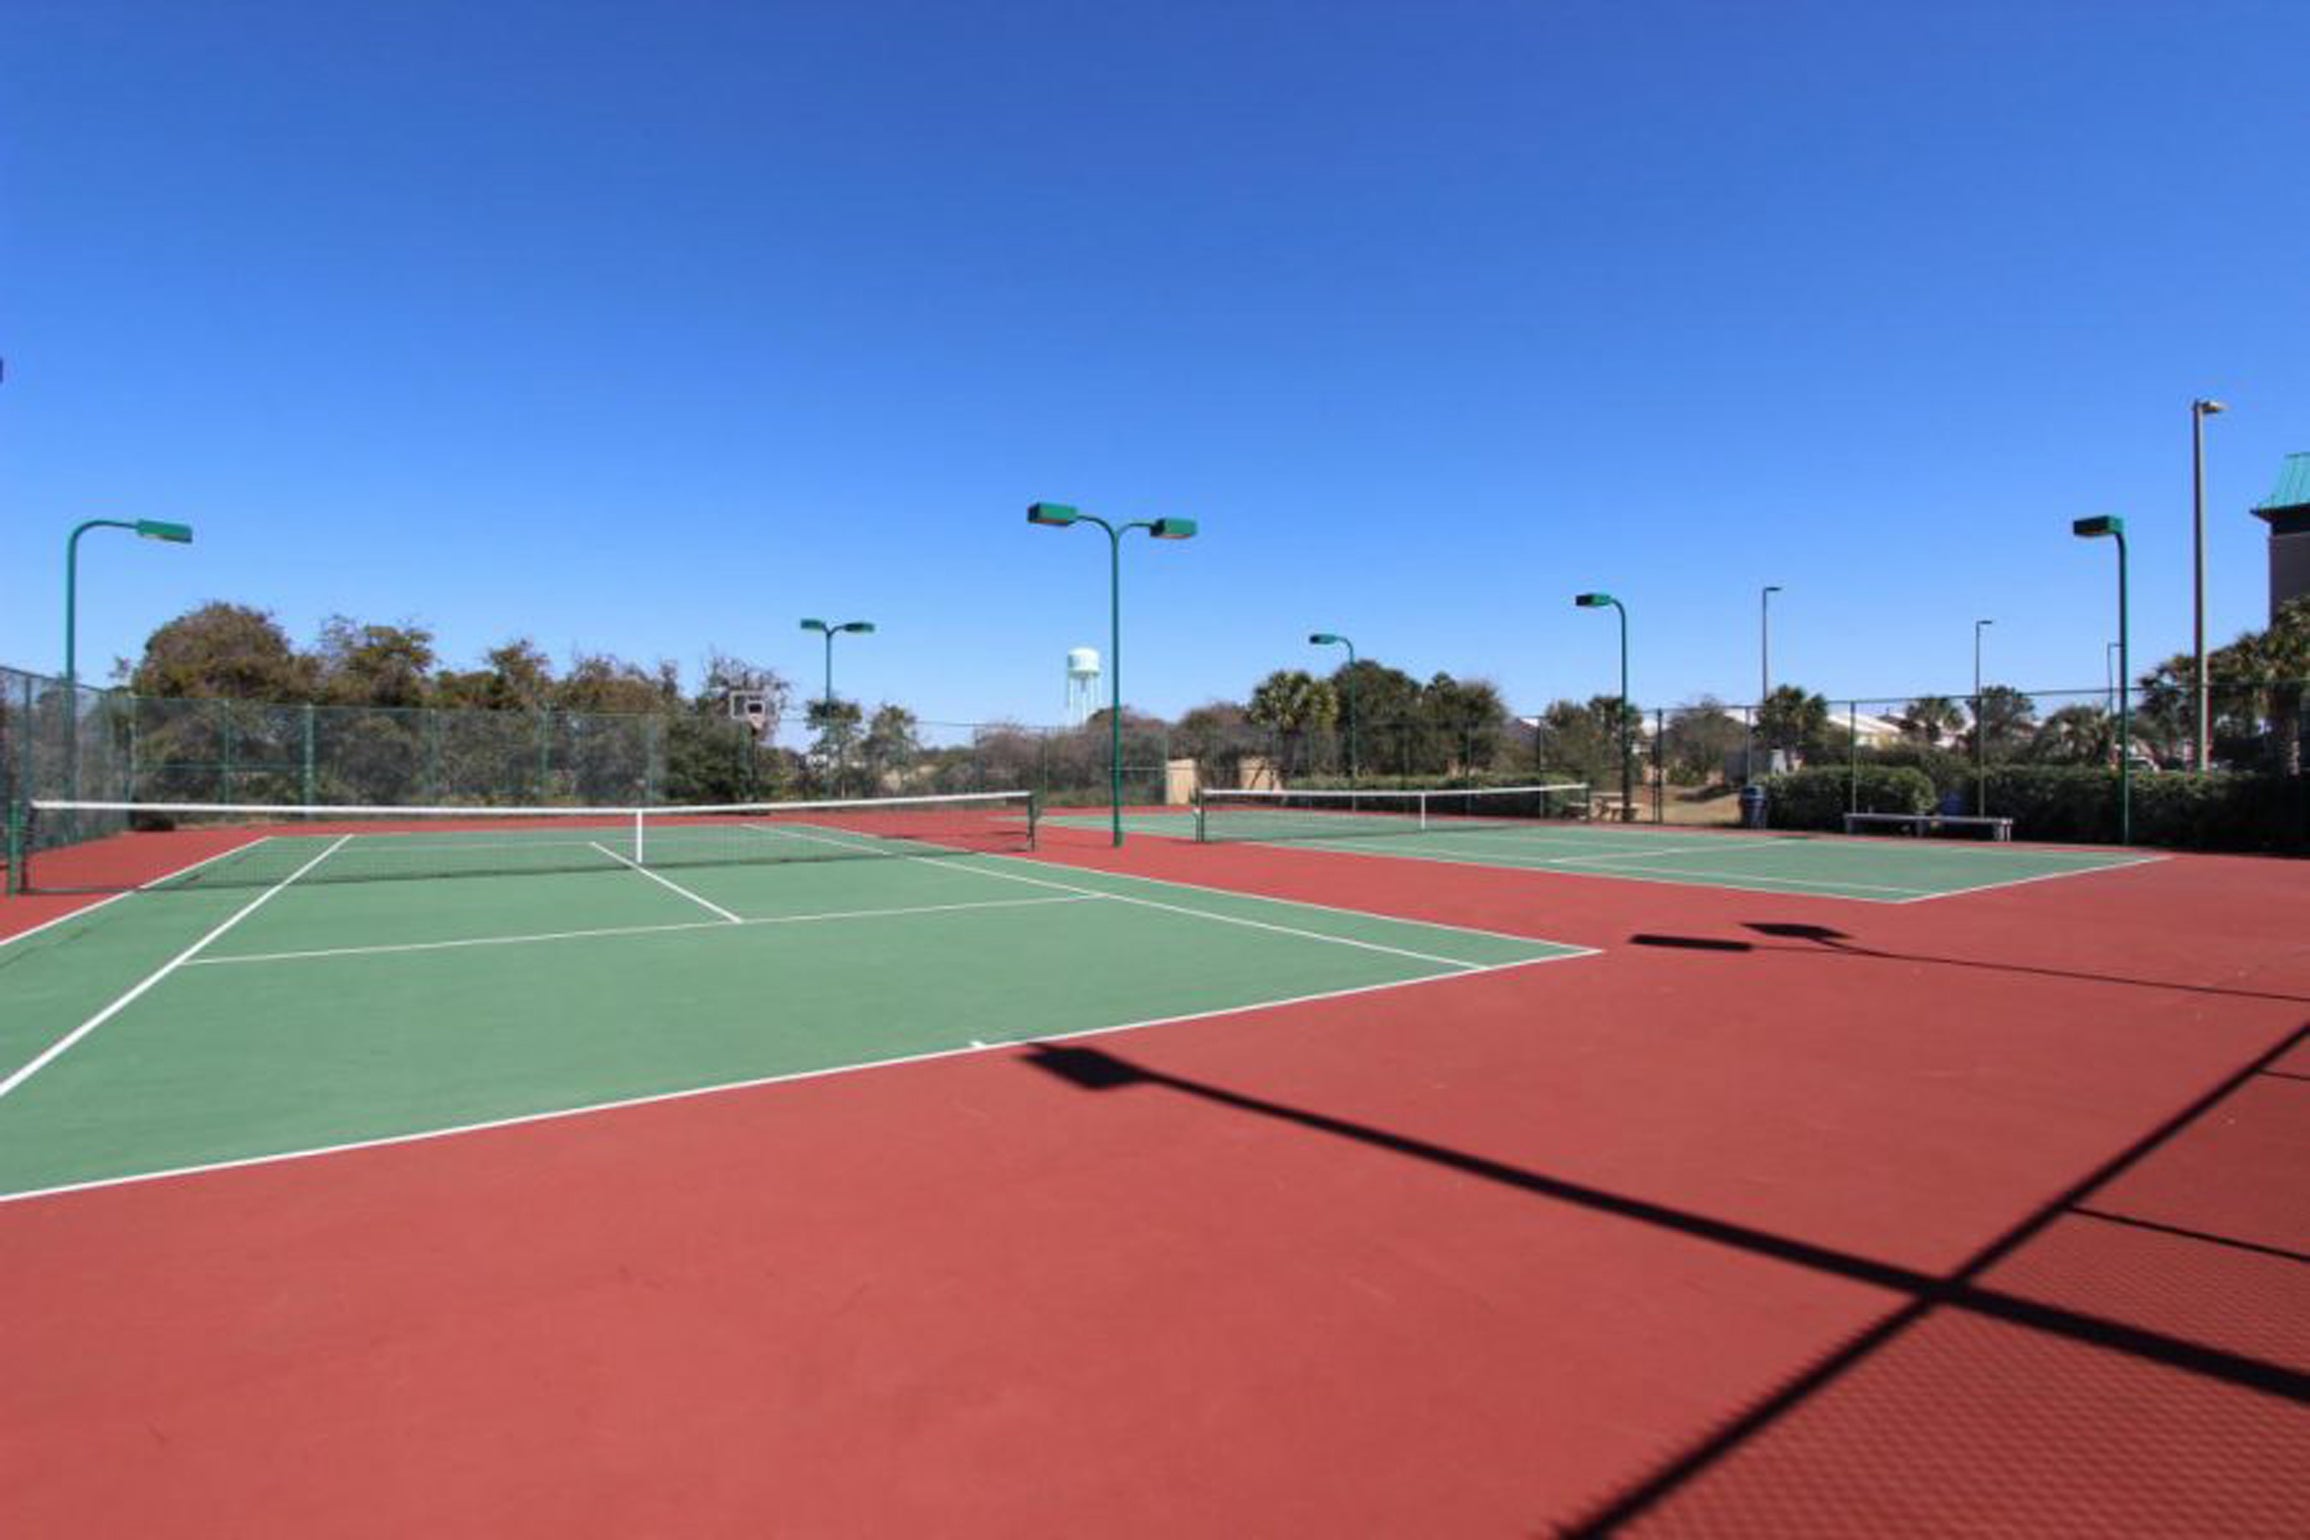 Lighted Tennis Courts